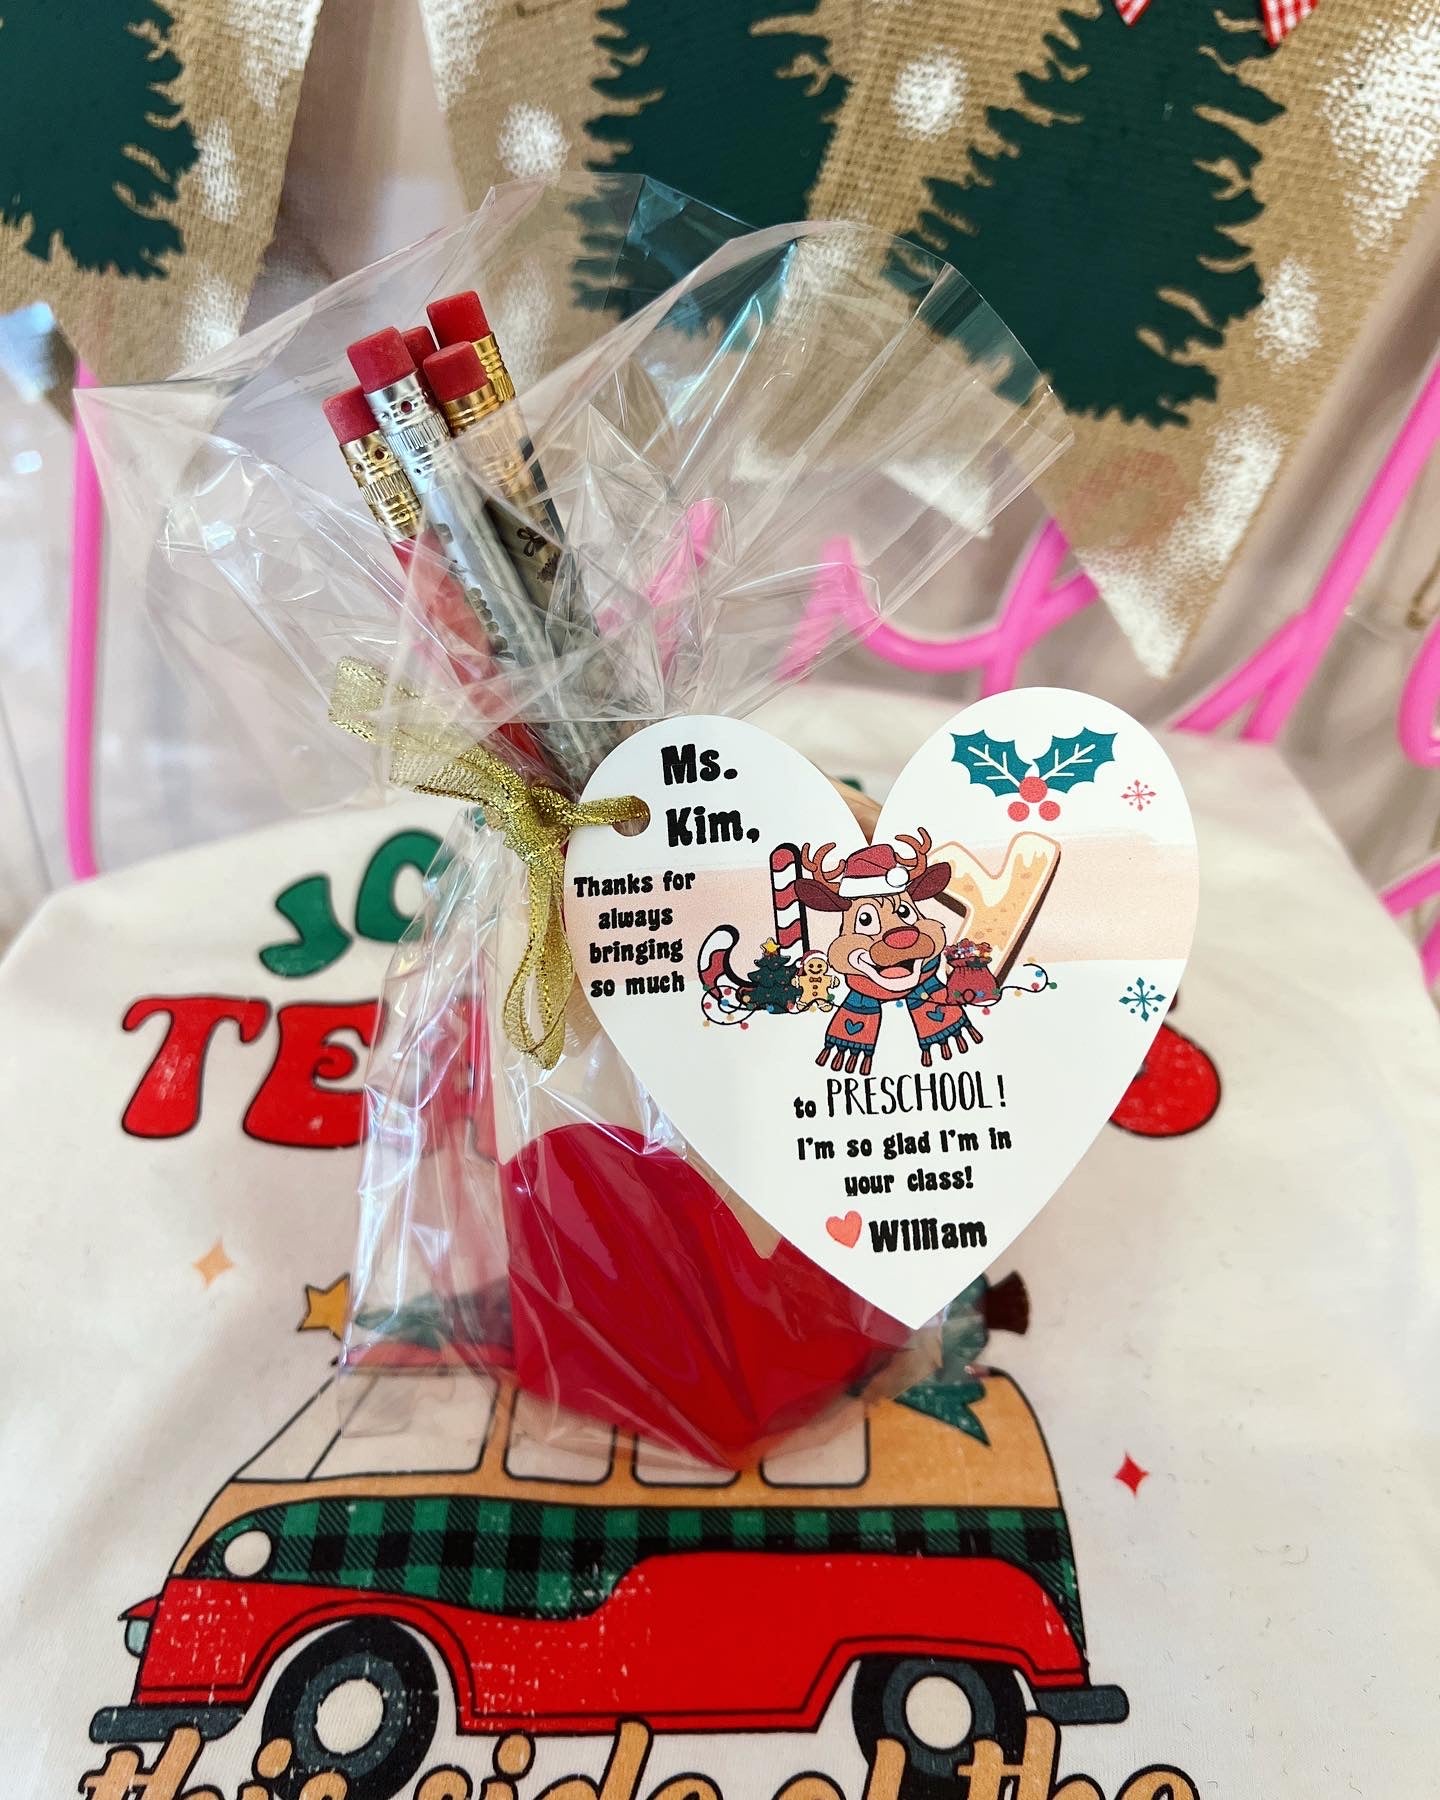 Thanks for bringing so much JOY to school! Engraved Teacher Pencils,Pencil cup! Gift wrap w/heart card, pencil cup holder!